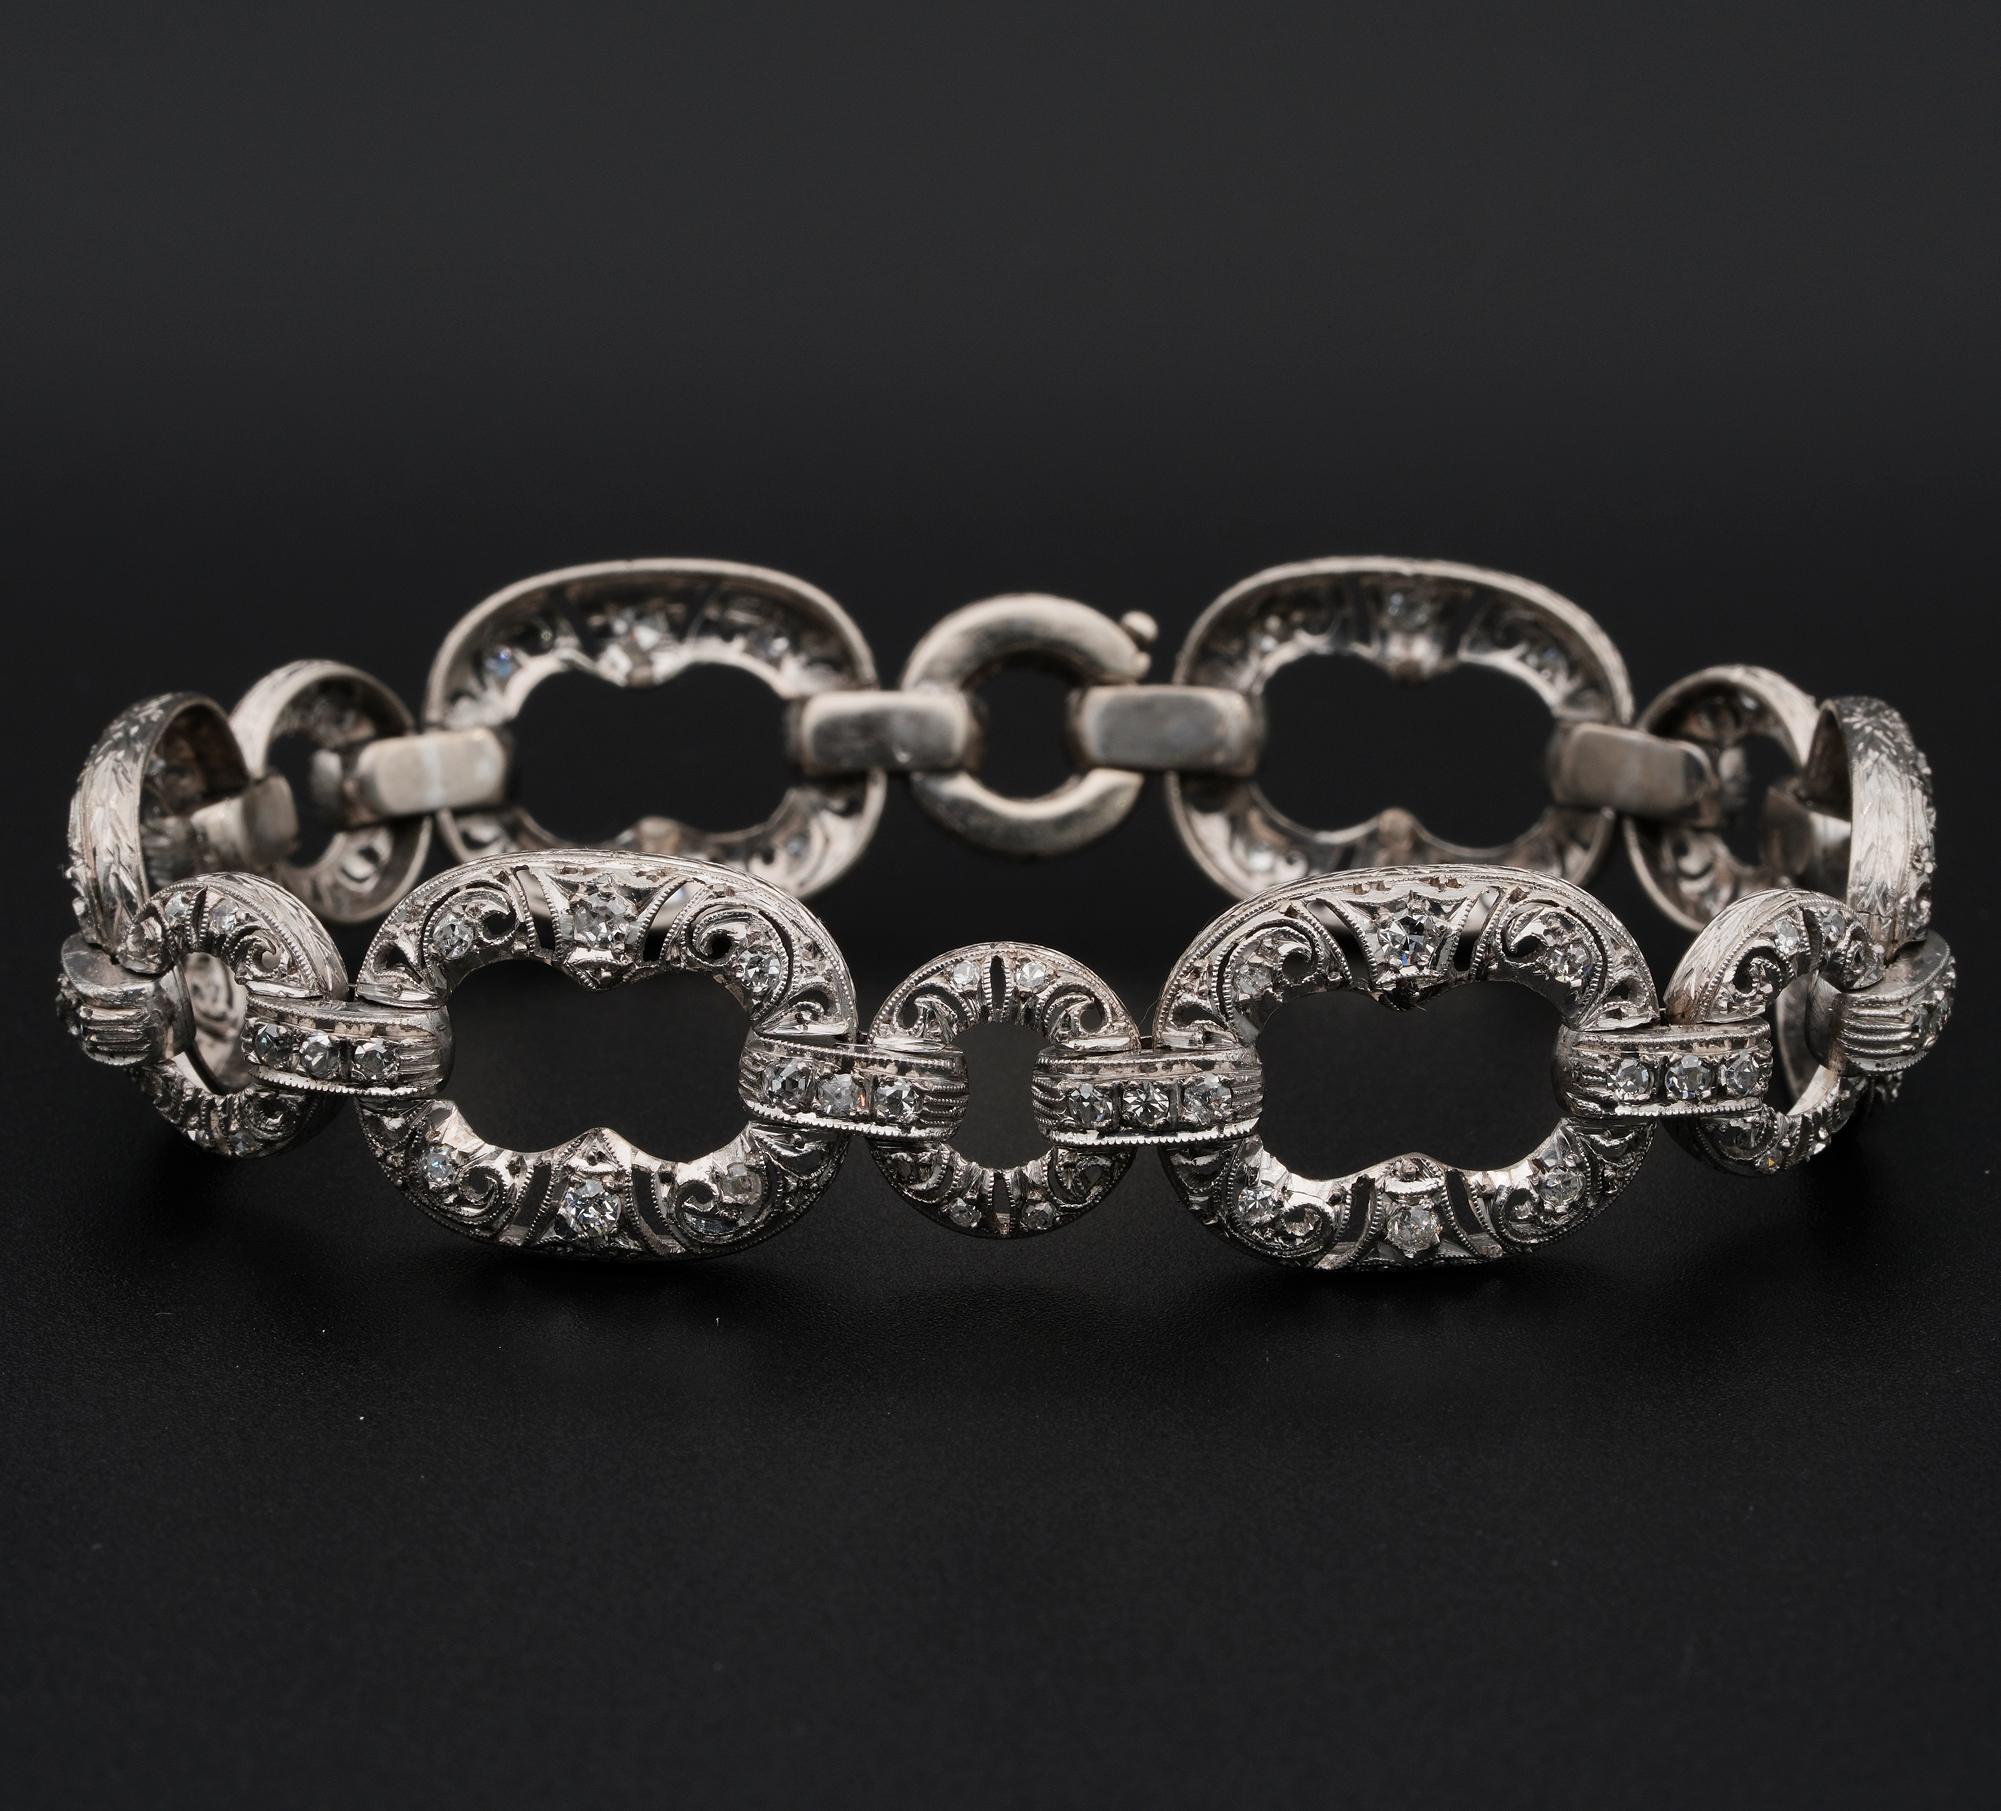 Roaring 20's

Absolute Beauty this one off bracelet original from the roaring 20's
Art Deco pure expression here for the extraordinary craftsmanship produced in combination to a very tasty design
This wonderful easy wear bracelet is made of all